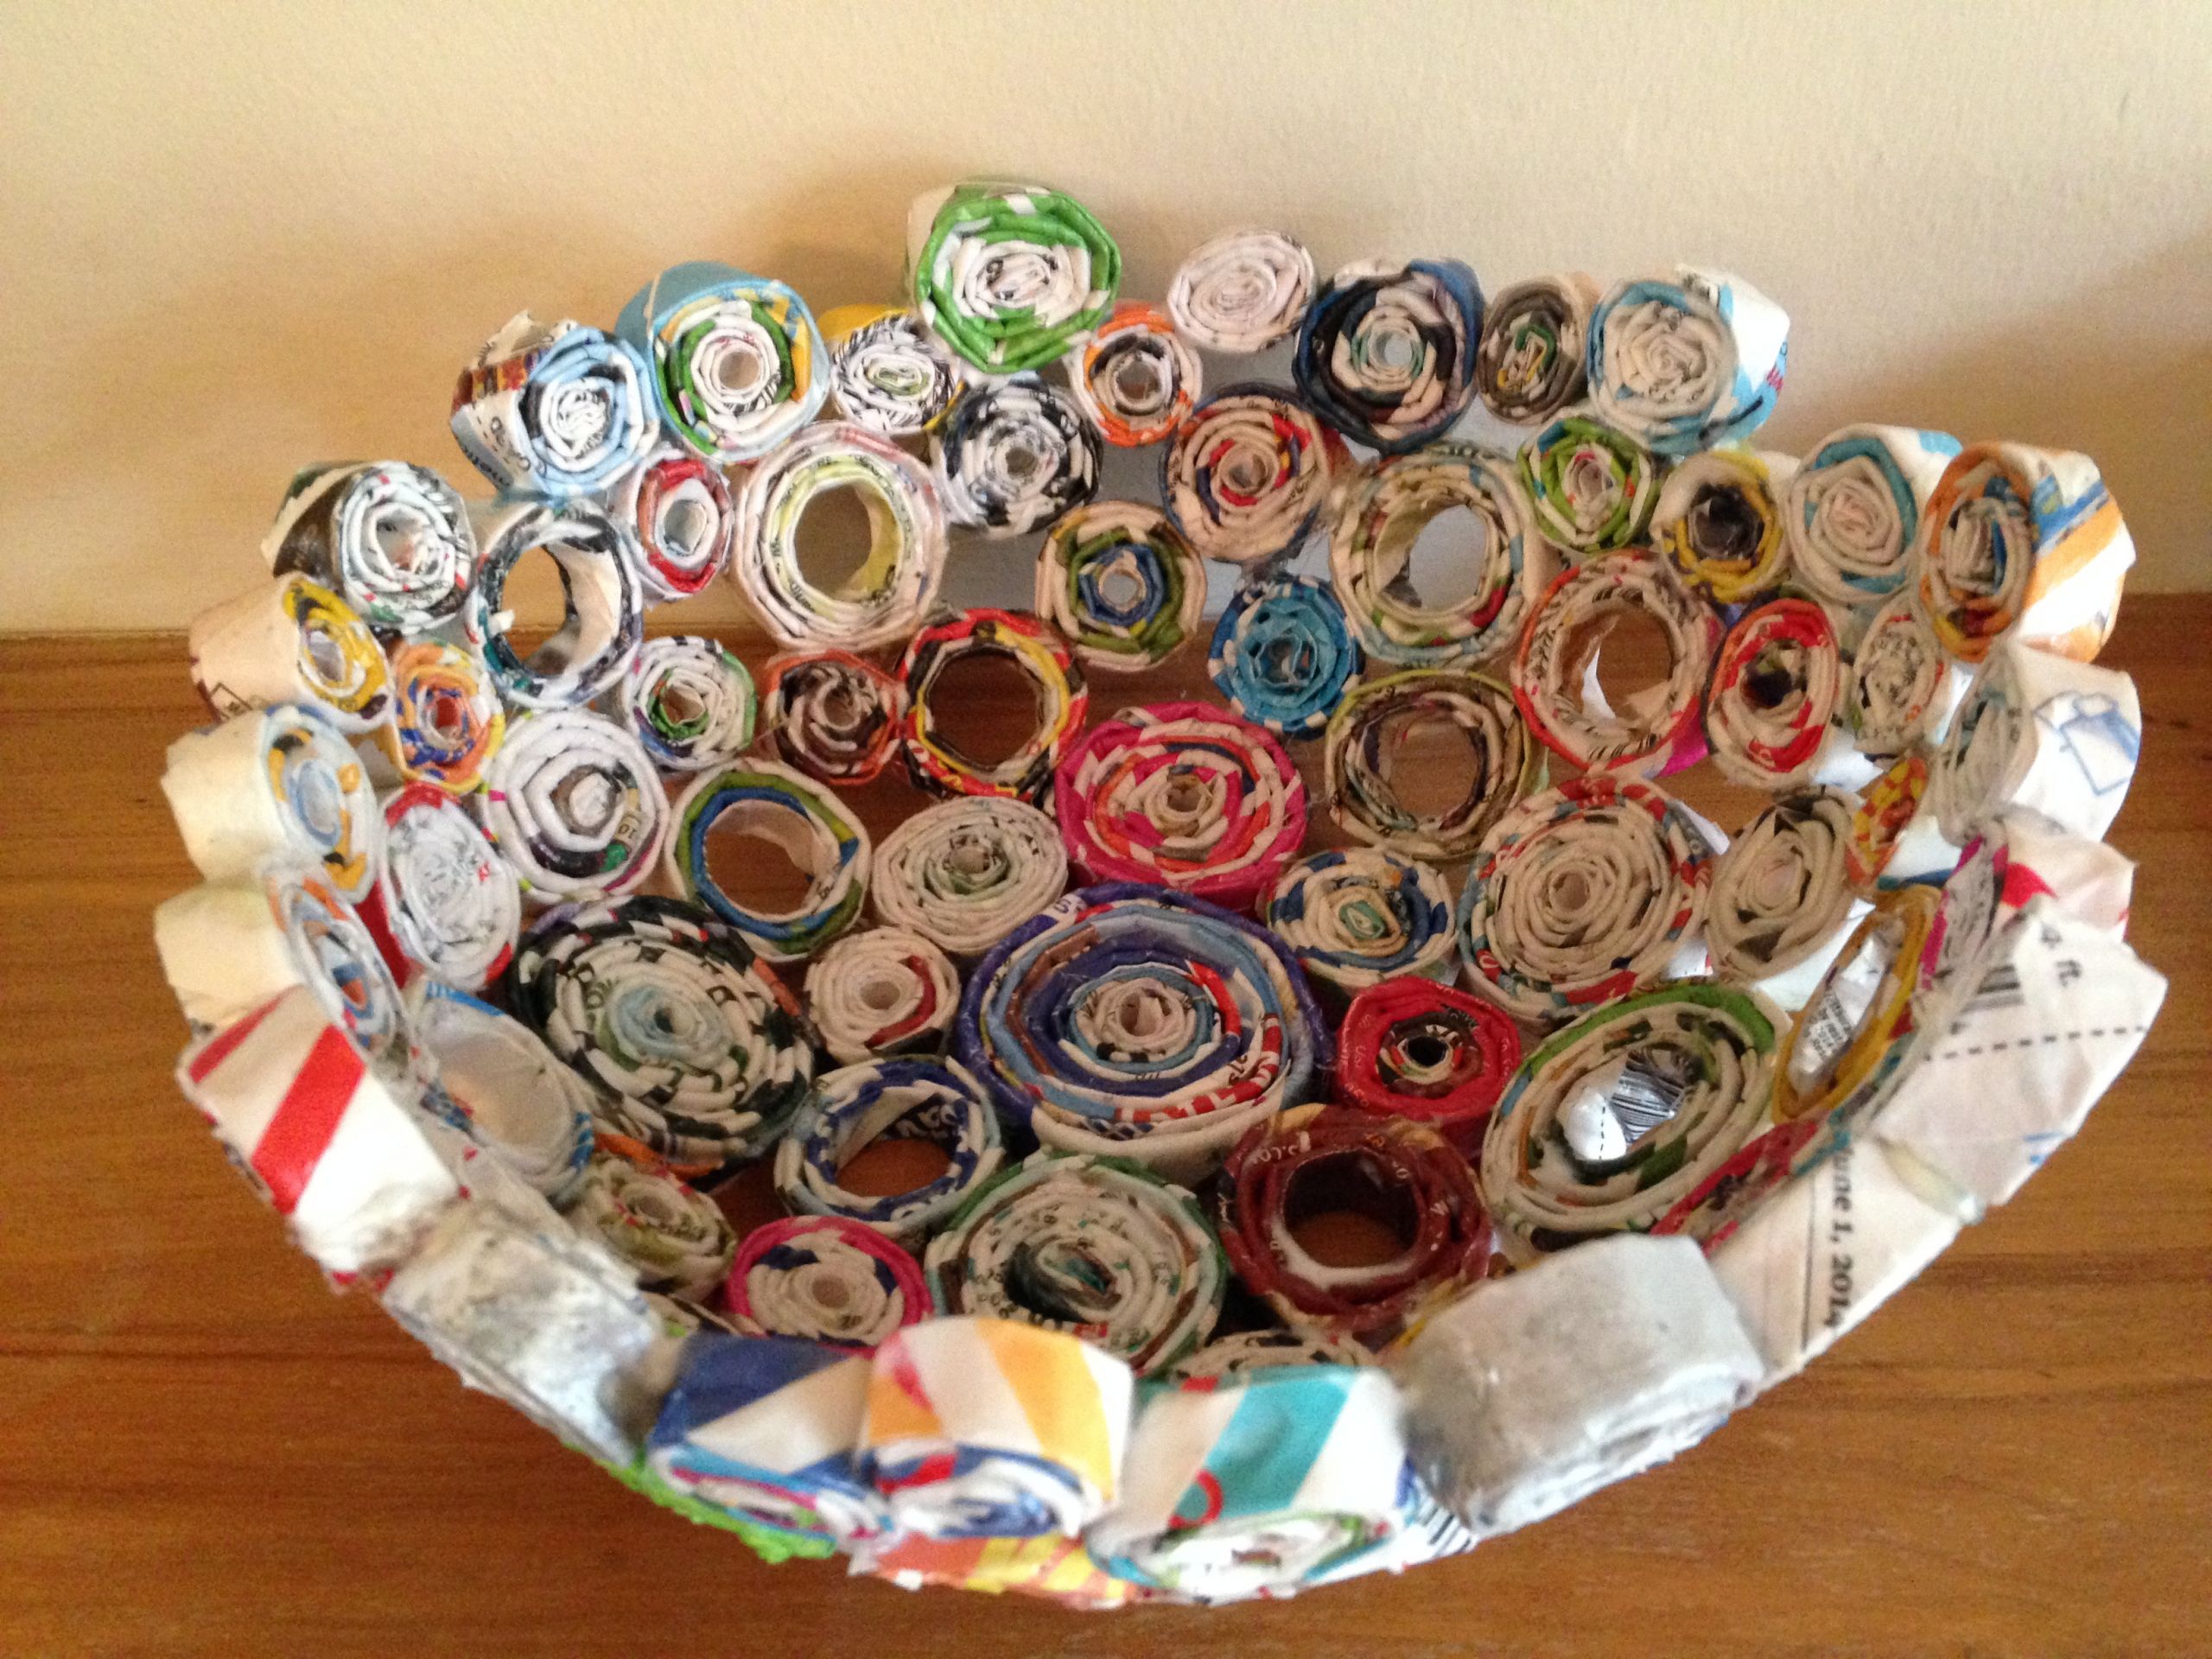 Craft Ideas For Adults Using Waste Material
 Uncategorized